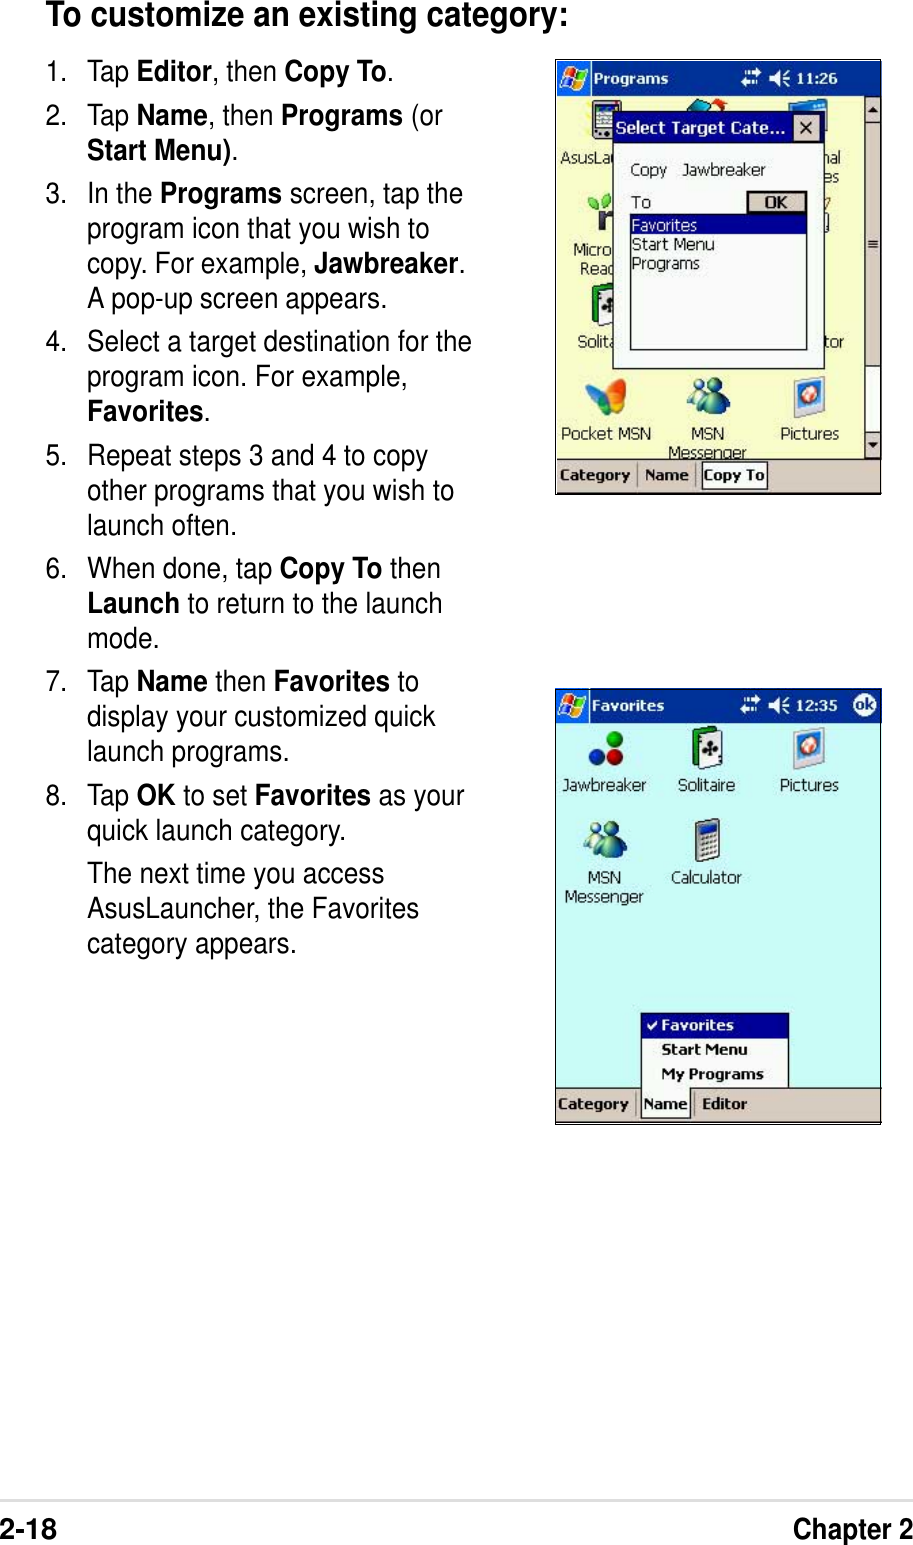 2-18Chapter 2To customize an existing category:1. Tap Editor, then Copy To.2. Tap Name, then Programs (orStart Menu).3. In the Programs screen, tap theprogram icon that you wish tocopy. For example, Jawbreaker.A pop-up screen appears.4. Select a target destination for theprogram icon. For example,Favorites.5. Repeat steps 3 and 4 to copyother programs that you wish tolaunch often.6. When done, tap Copy To thenLaunch to return to the launchmode.7. Tap Name then Favorites todisplay your customized quicklaunch programs.8. Tap OK to set Favorites as yourquick launch category.The next time you accessAsusLauncher, the Favoritescategory appears.